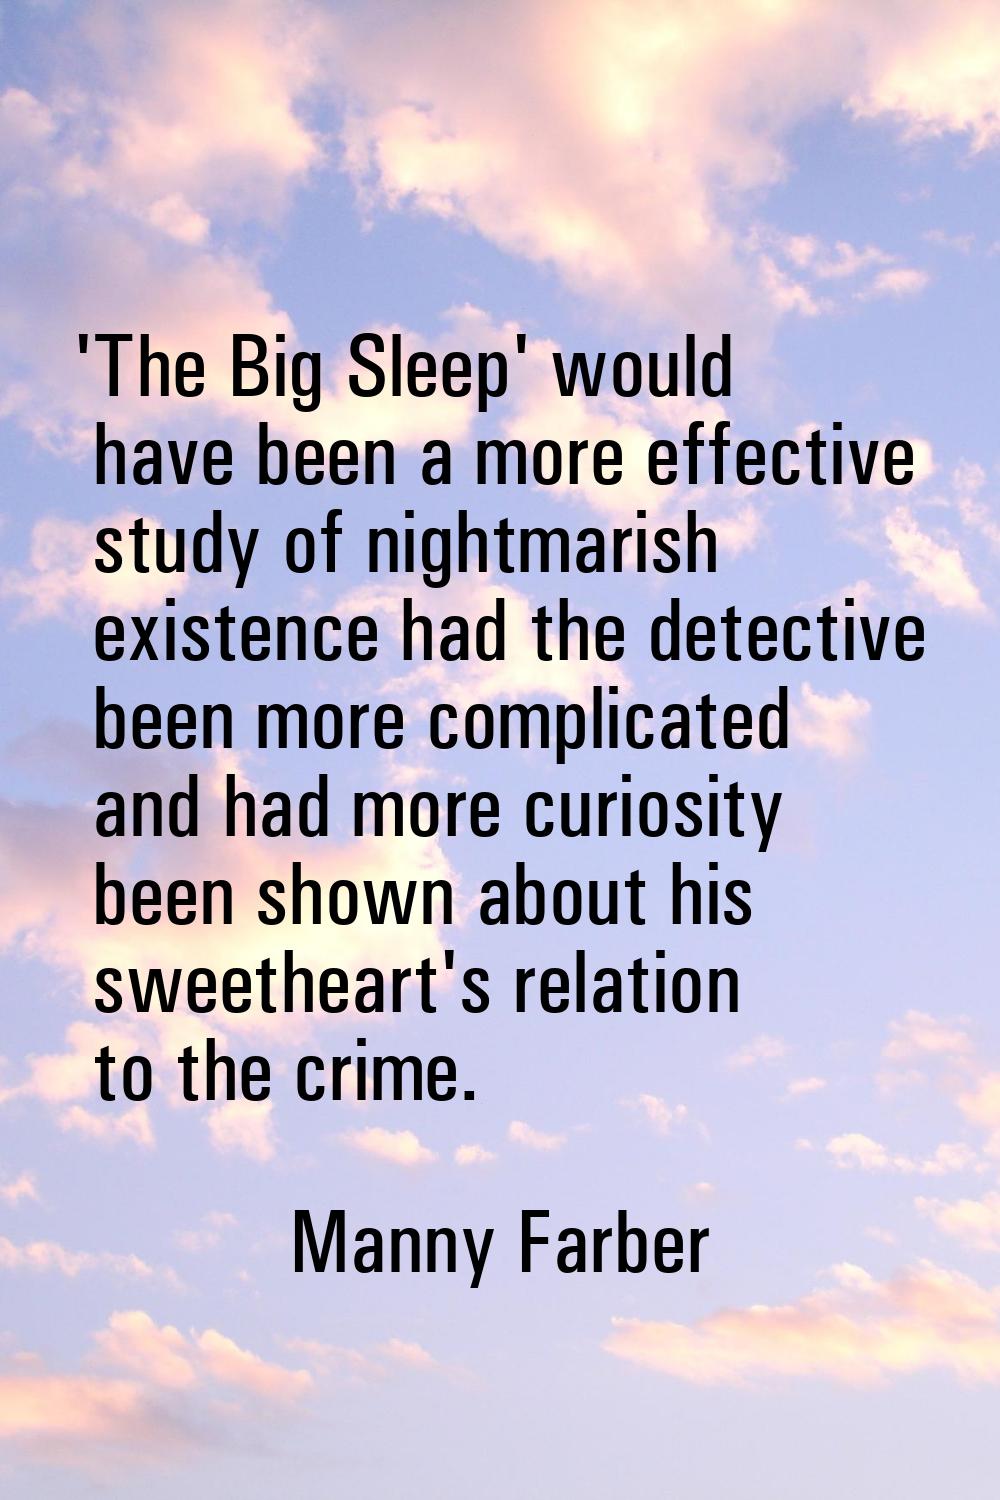 'The Big Sleep' would have been a more effective study of nightmarish existence had the detective b